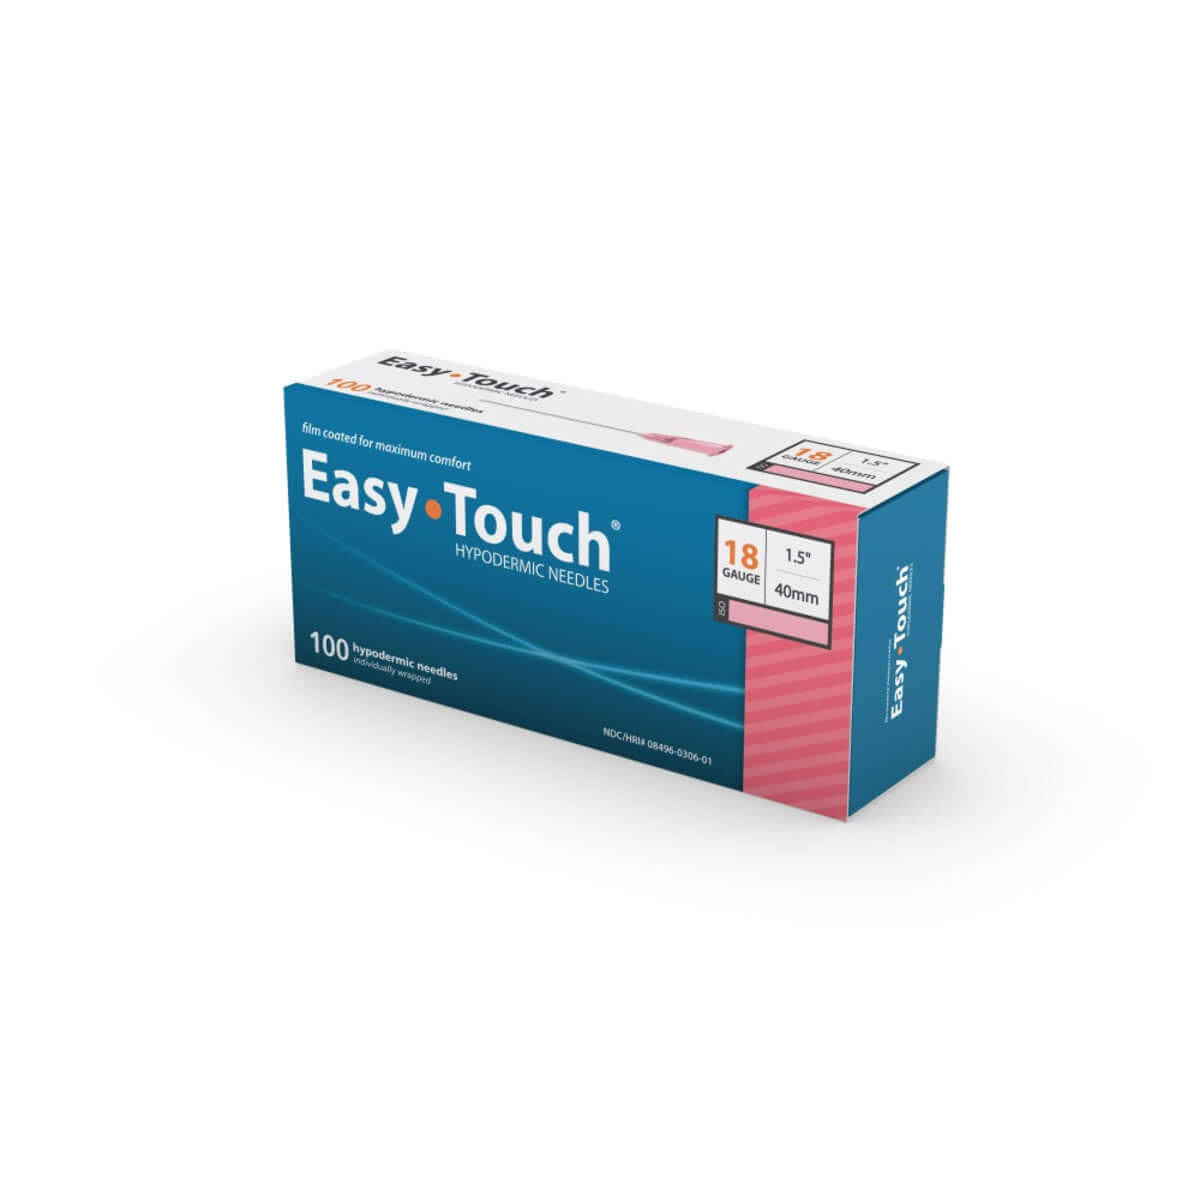 Easy Touch Hypodermic Needle 100ct 18g 40mm, 1.5 in 801807